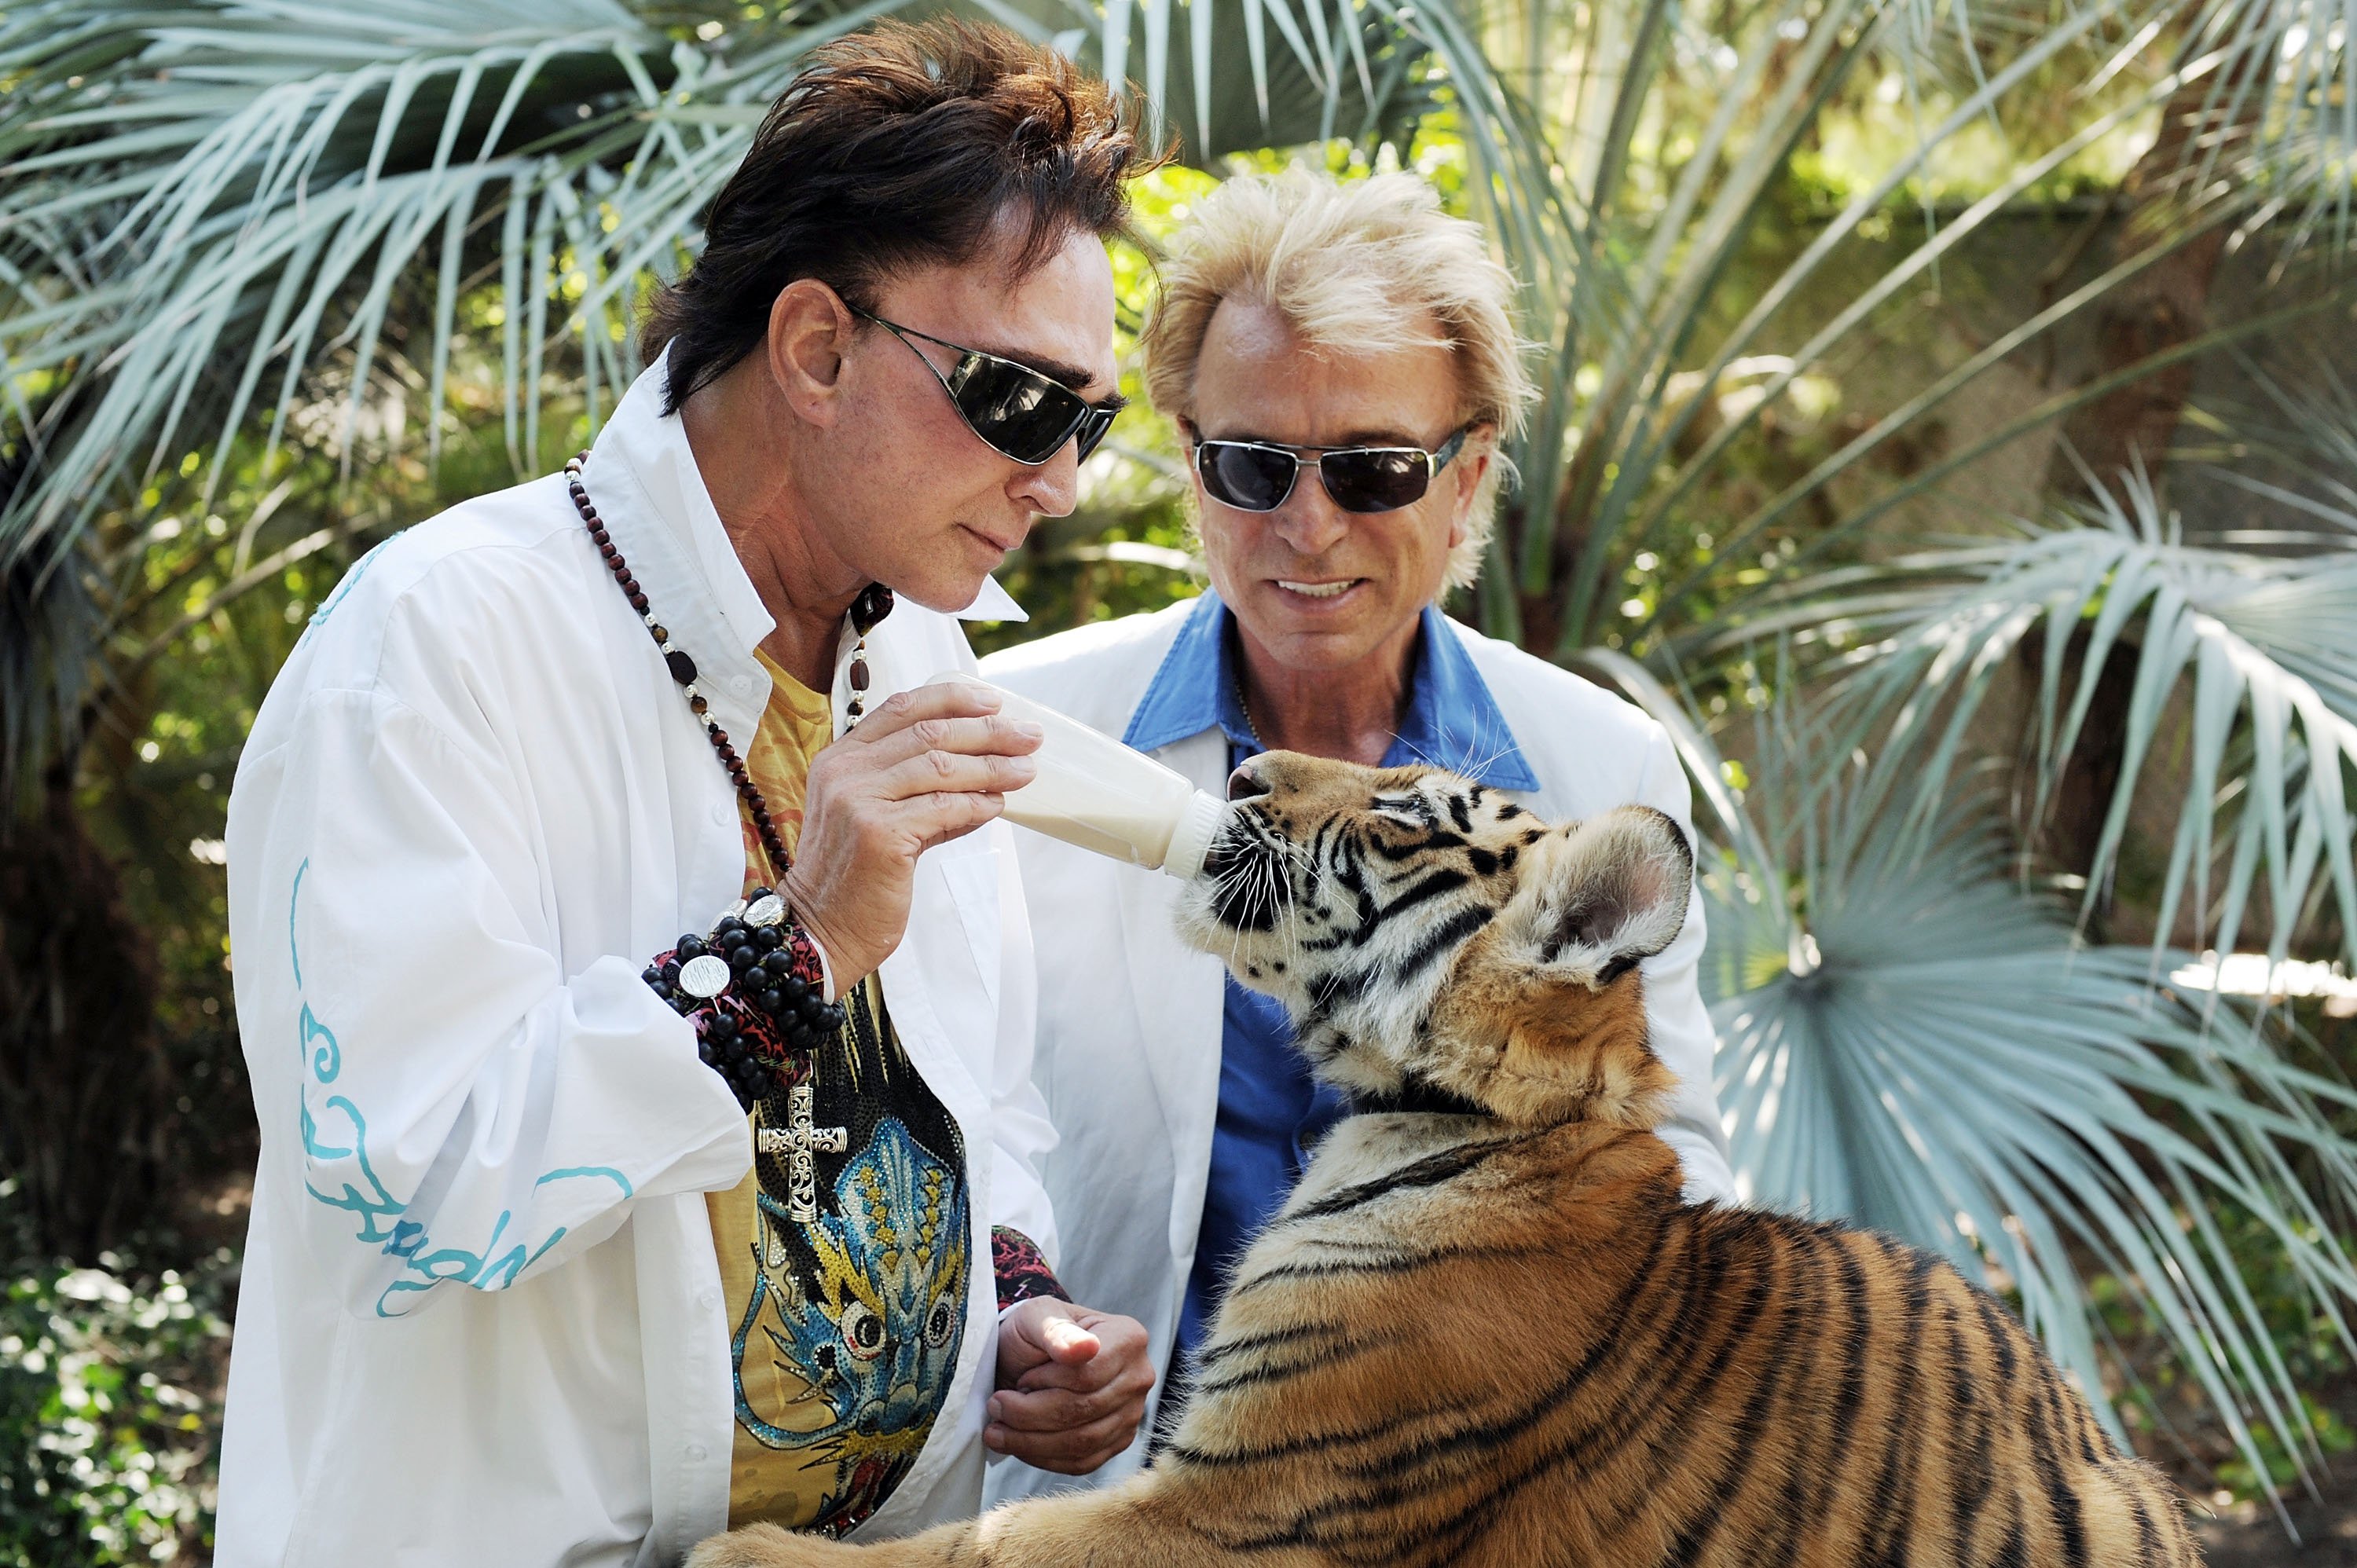 Siegfried Fischbacher and Roy Horn feeding one of their tiger cubs in Las Vegas in August, 2008. | Photo: Getty Images.